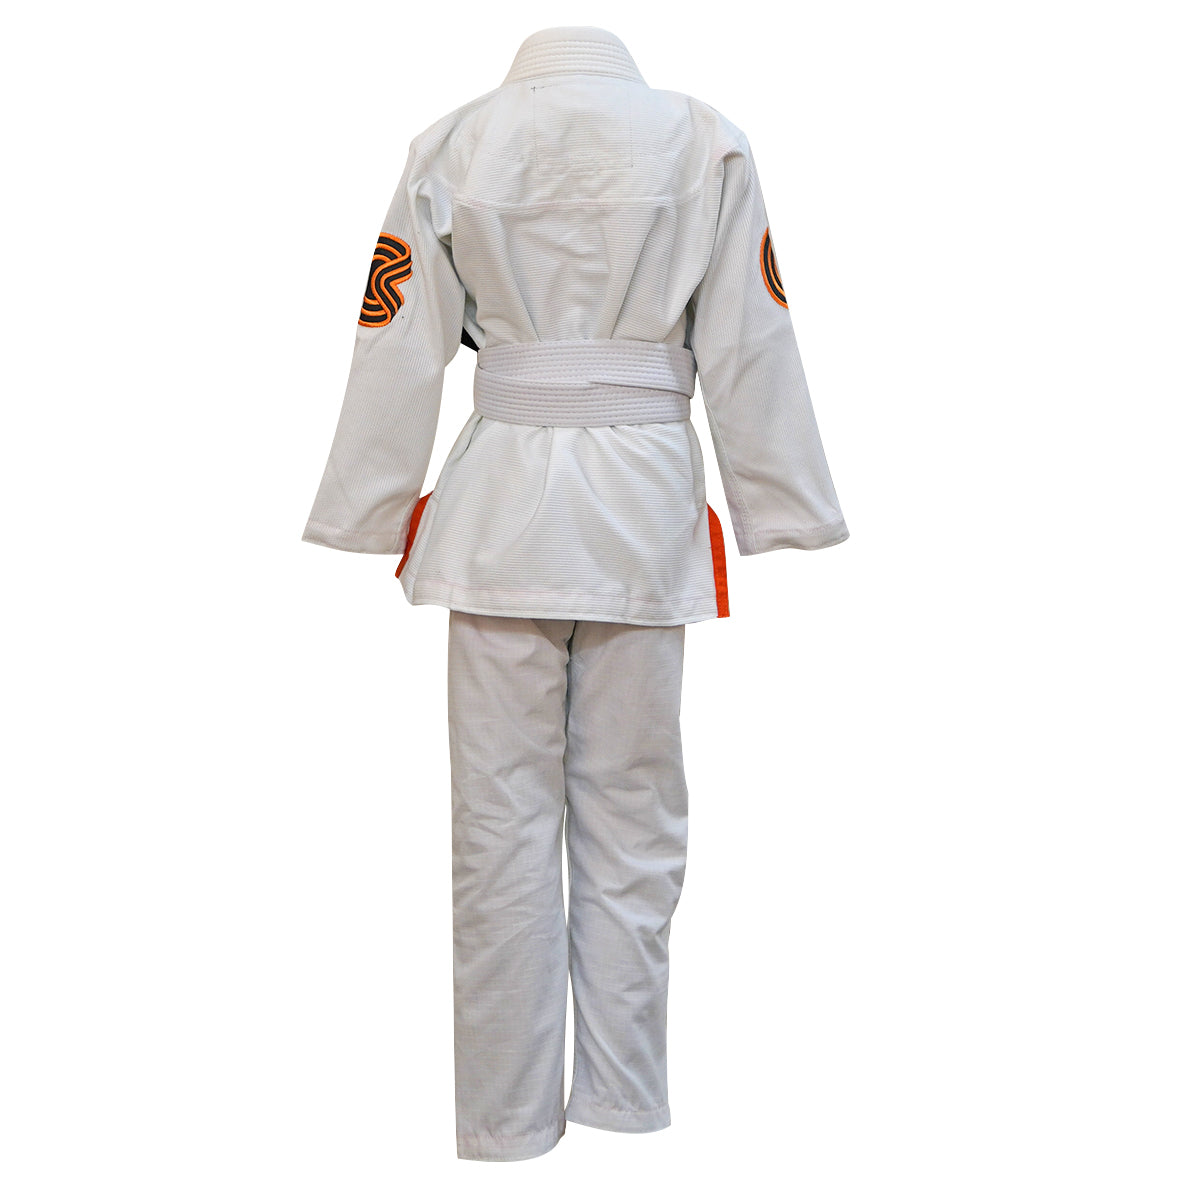 Chaos and Order Kid's Base Label V2 BJJ Gi - White Chaos and Order